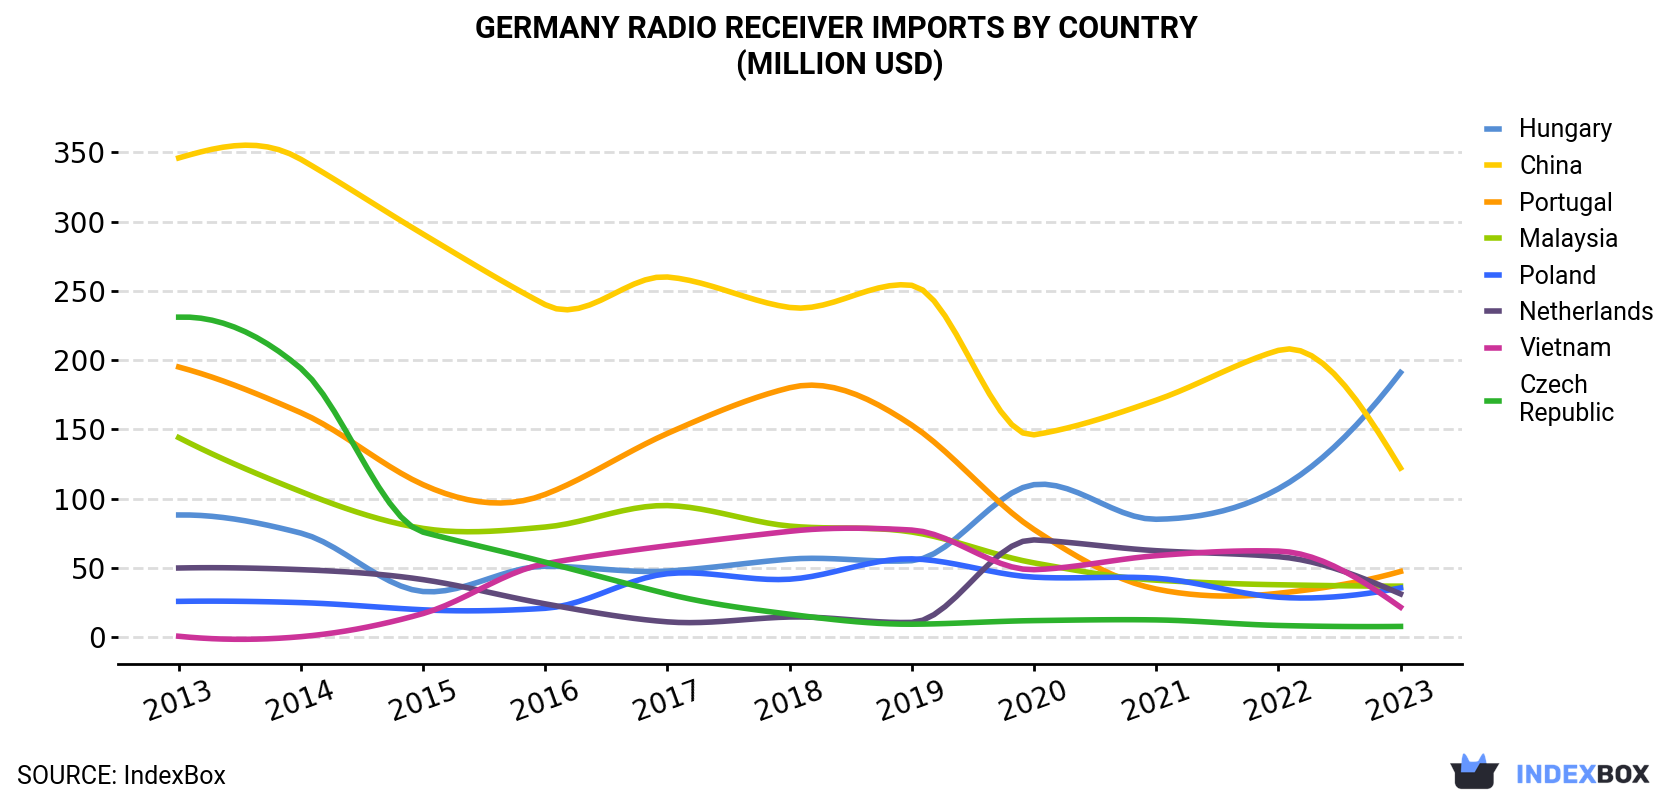 Germany Radio Receiver Imports By Country (Million USD)